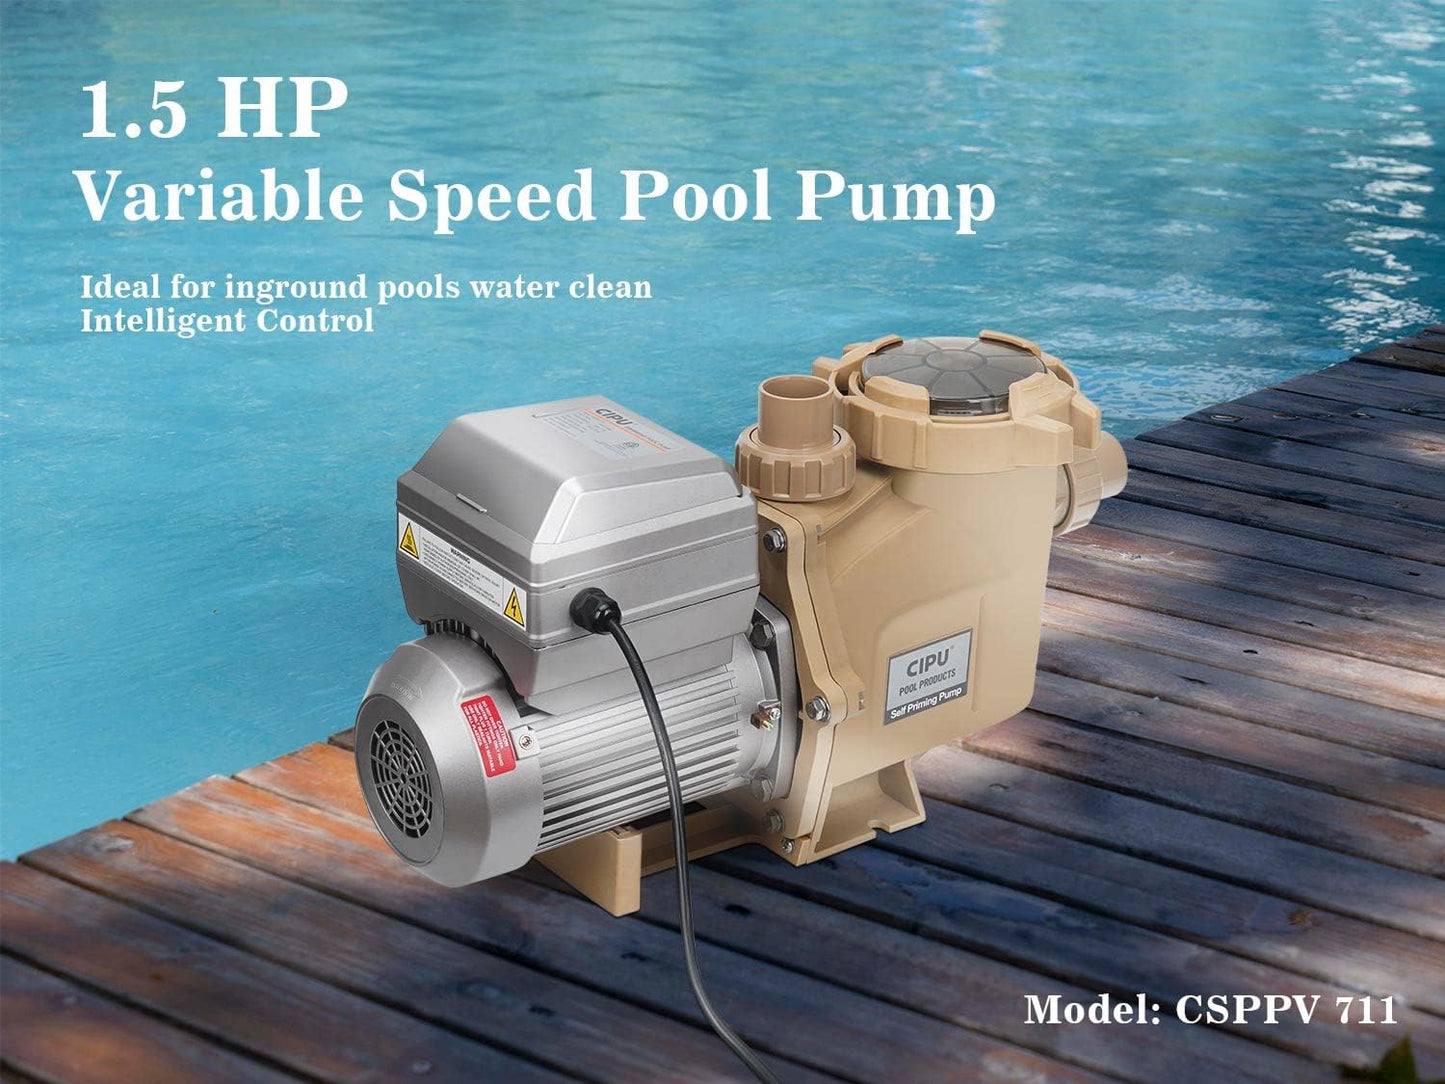 1.5HP Variable Speed Inground Pool Pump 230V High Performance Intelligent Control for Swimming Pools All-Weather Water Clean Filter Pump System Replacement ETL/DOE Certificated, CSPPV711